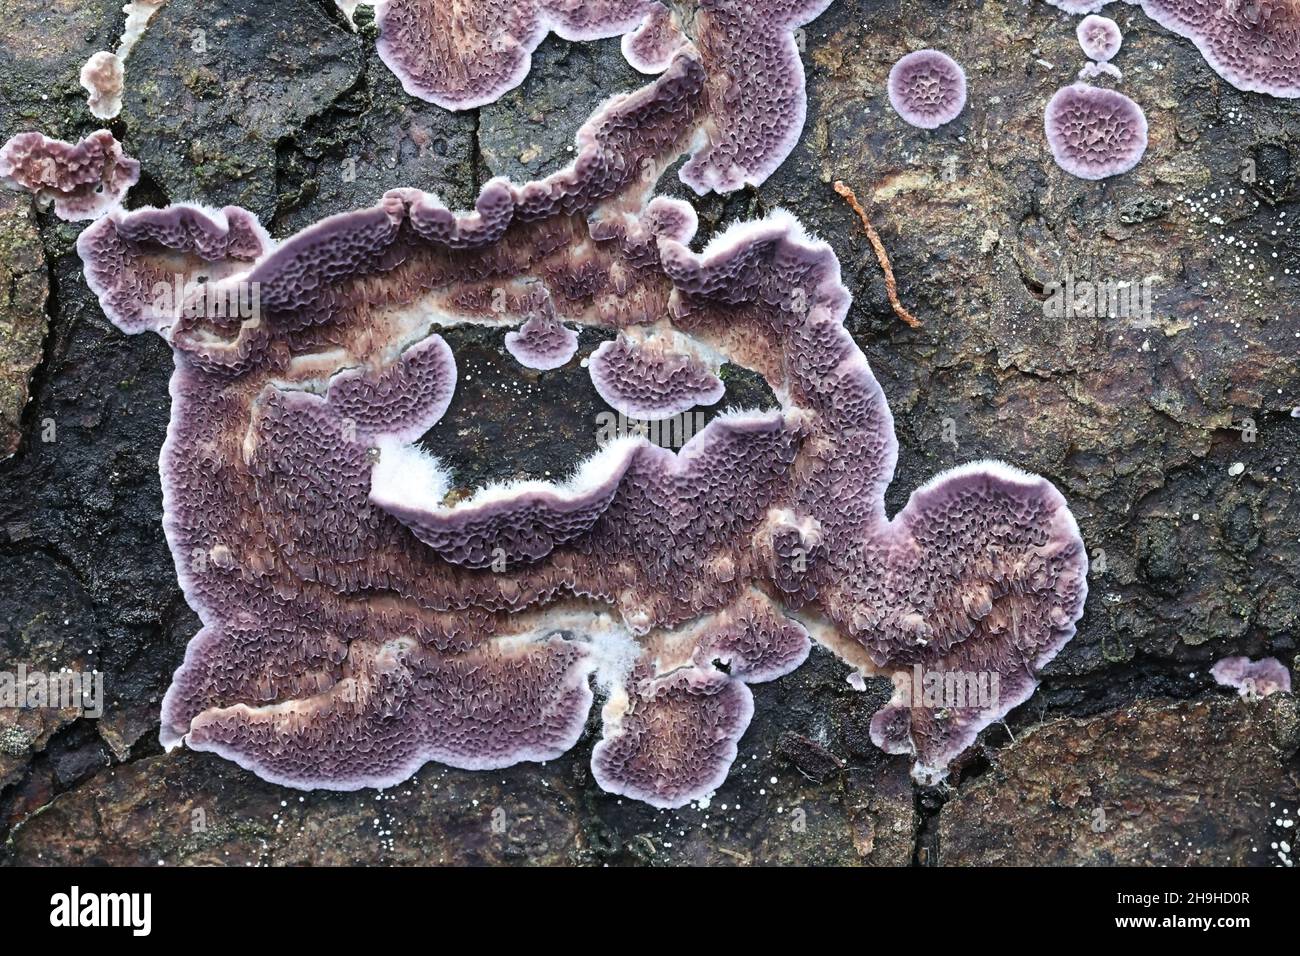 Trichaptum abietinum, known as purplepore bracket fungus or violet-toothed polypore, wild fungus from Finland Stock Photo